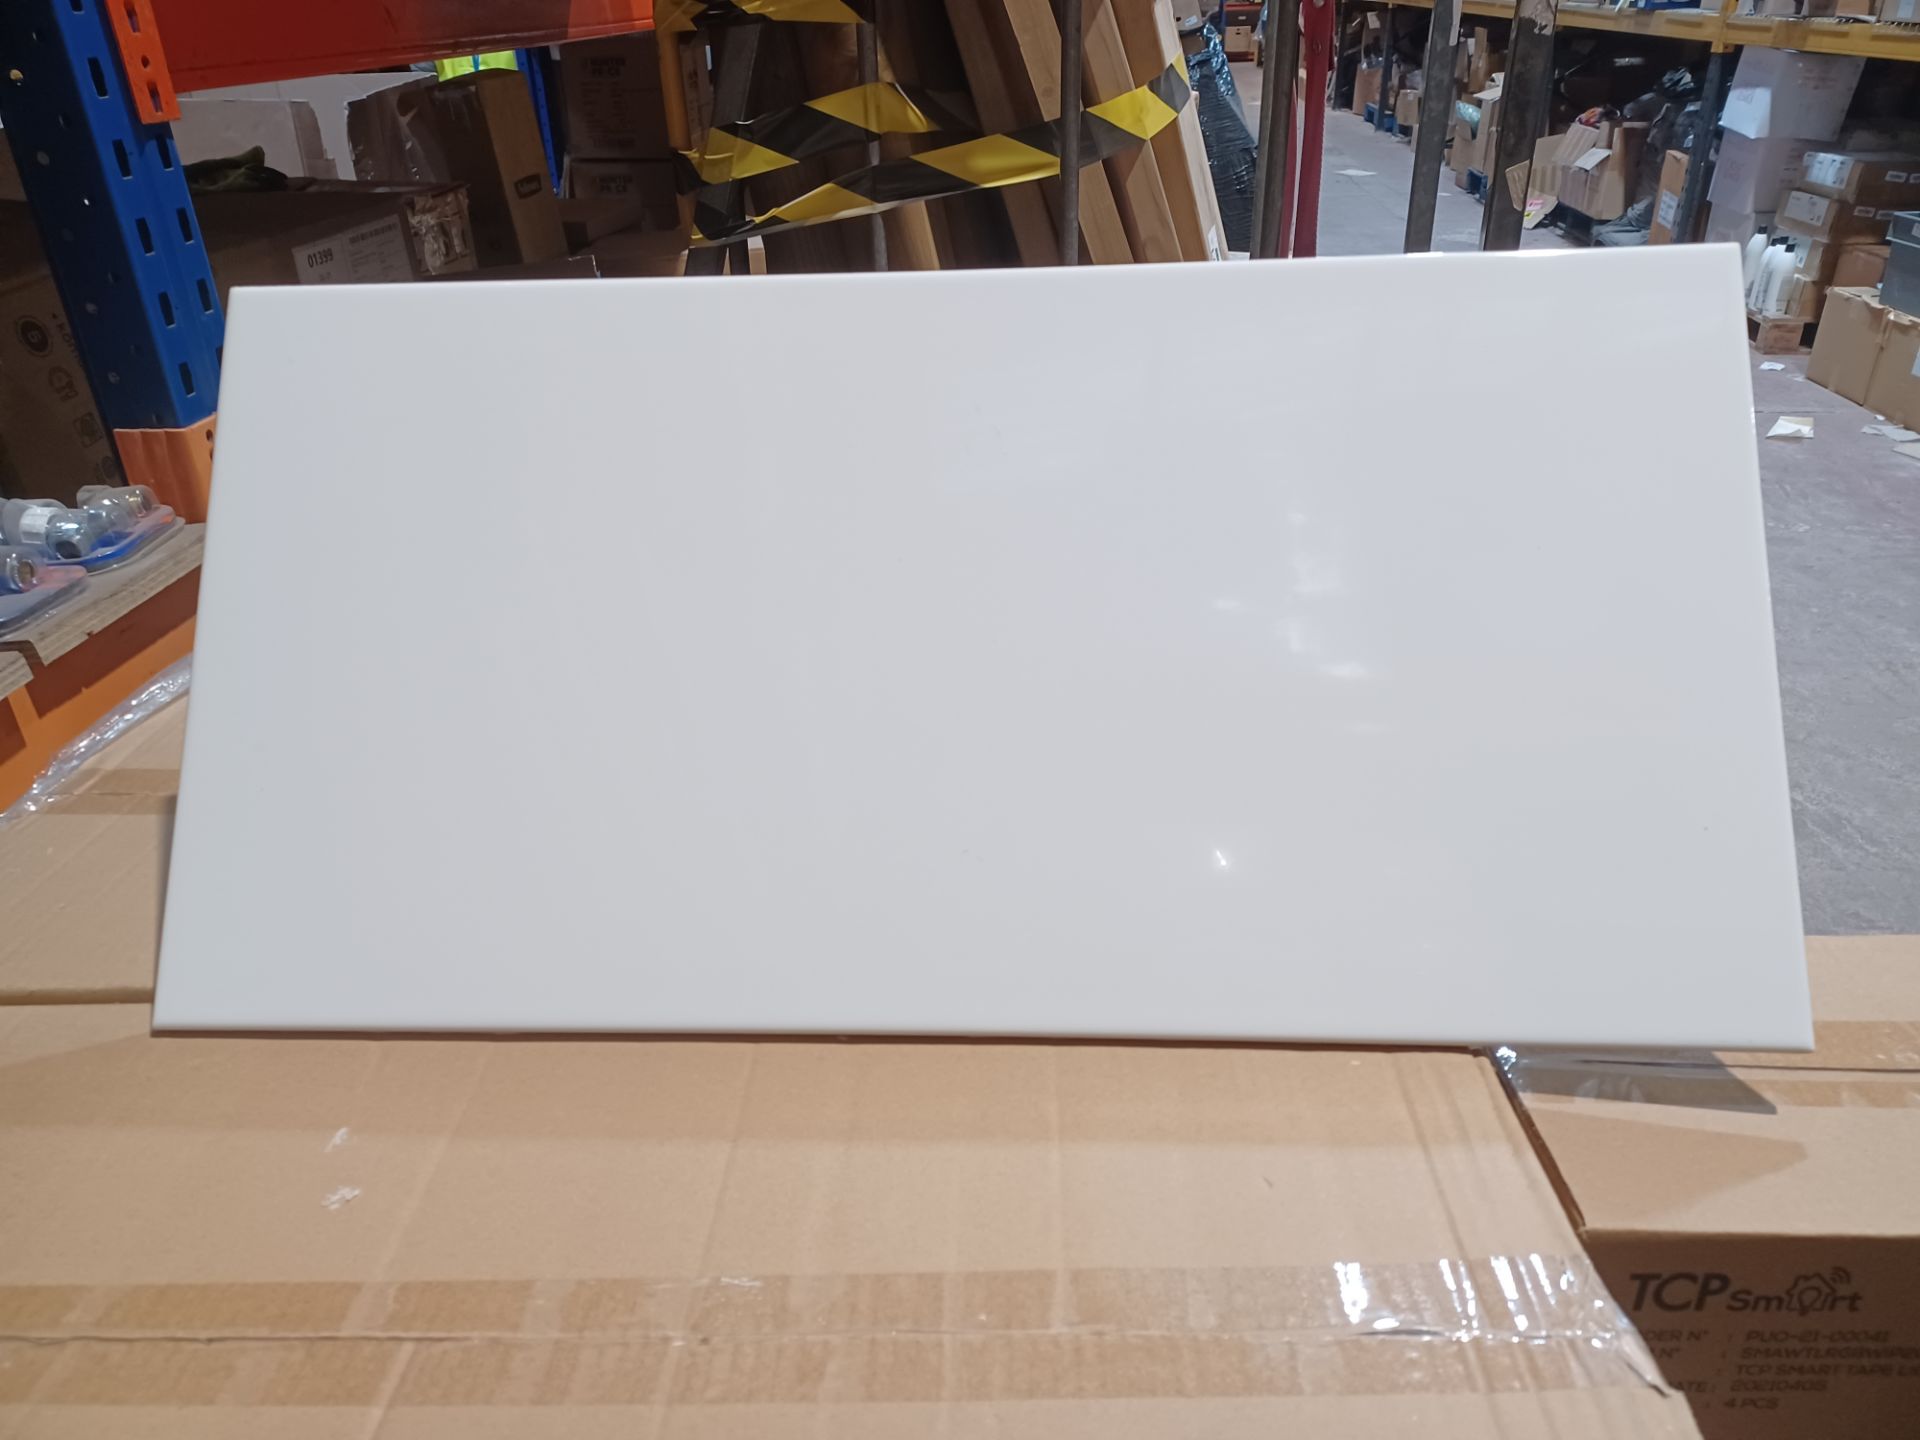 PALLET TO CONTAIN 40 x PACKS OF 600x300mm Johnsons White Ceramic White Gloss Wall Tiles (WKWH1A) 1m2